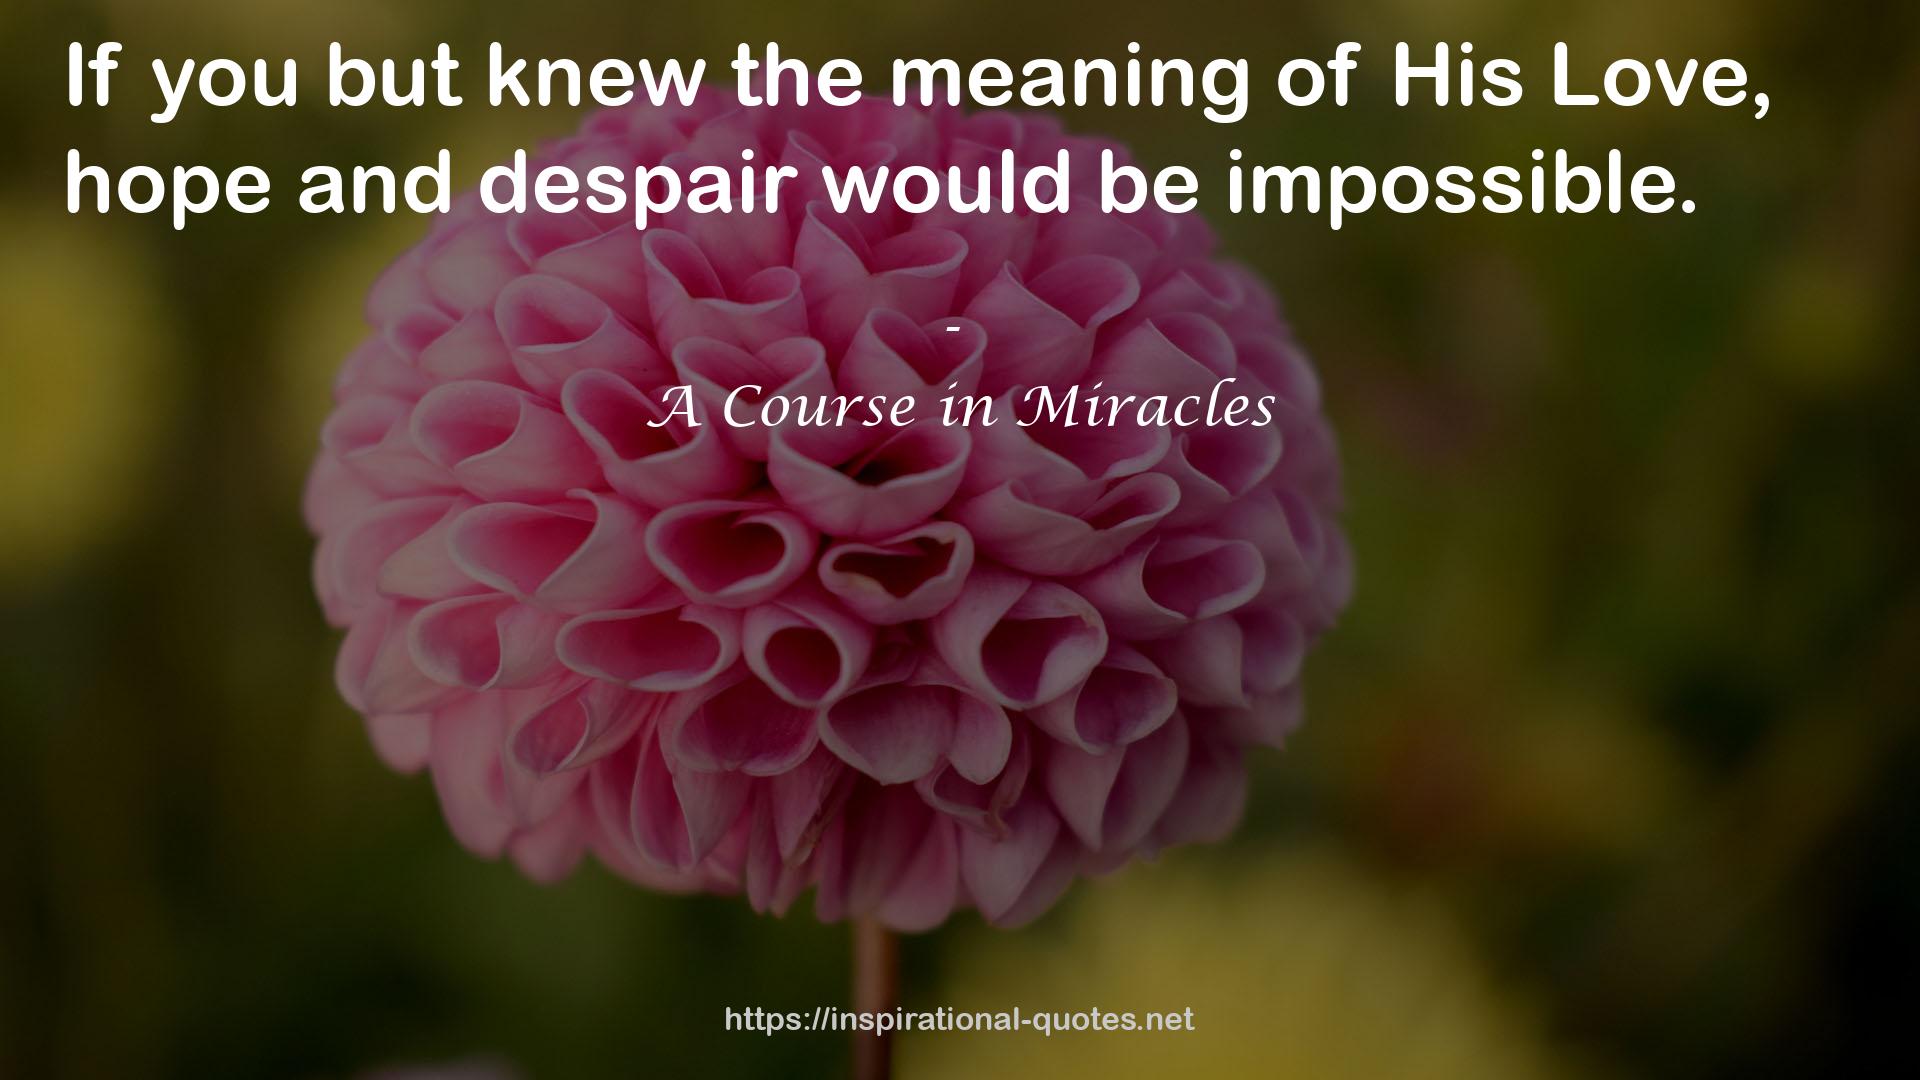 A Course in Miracles QUOTES